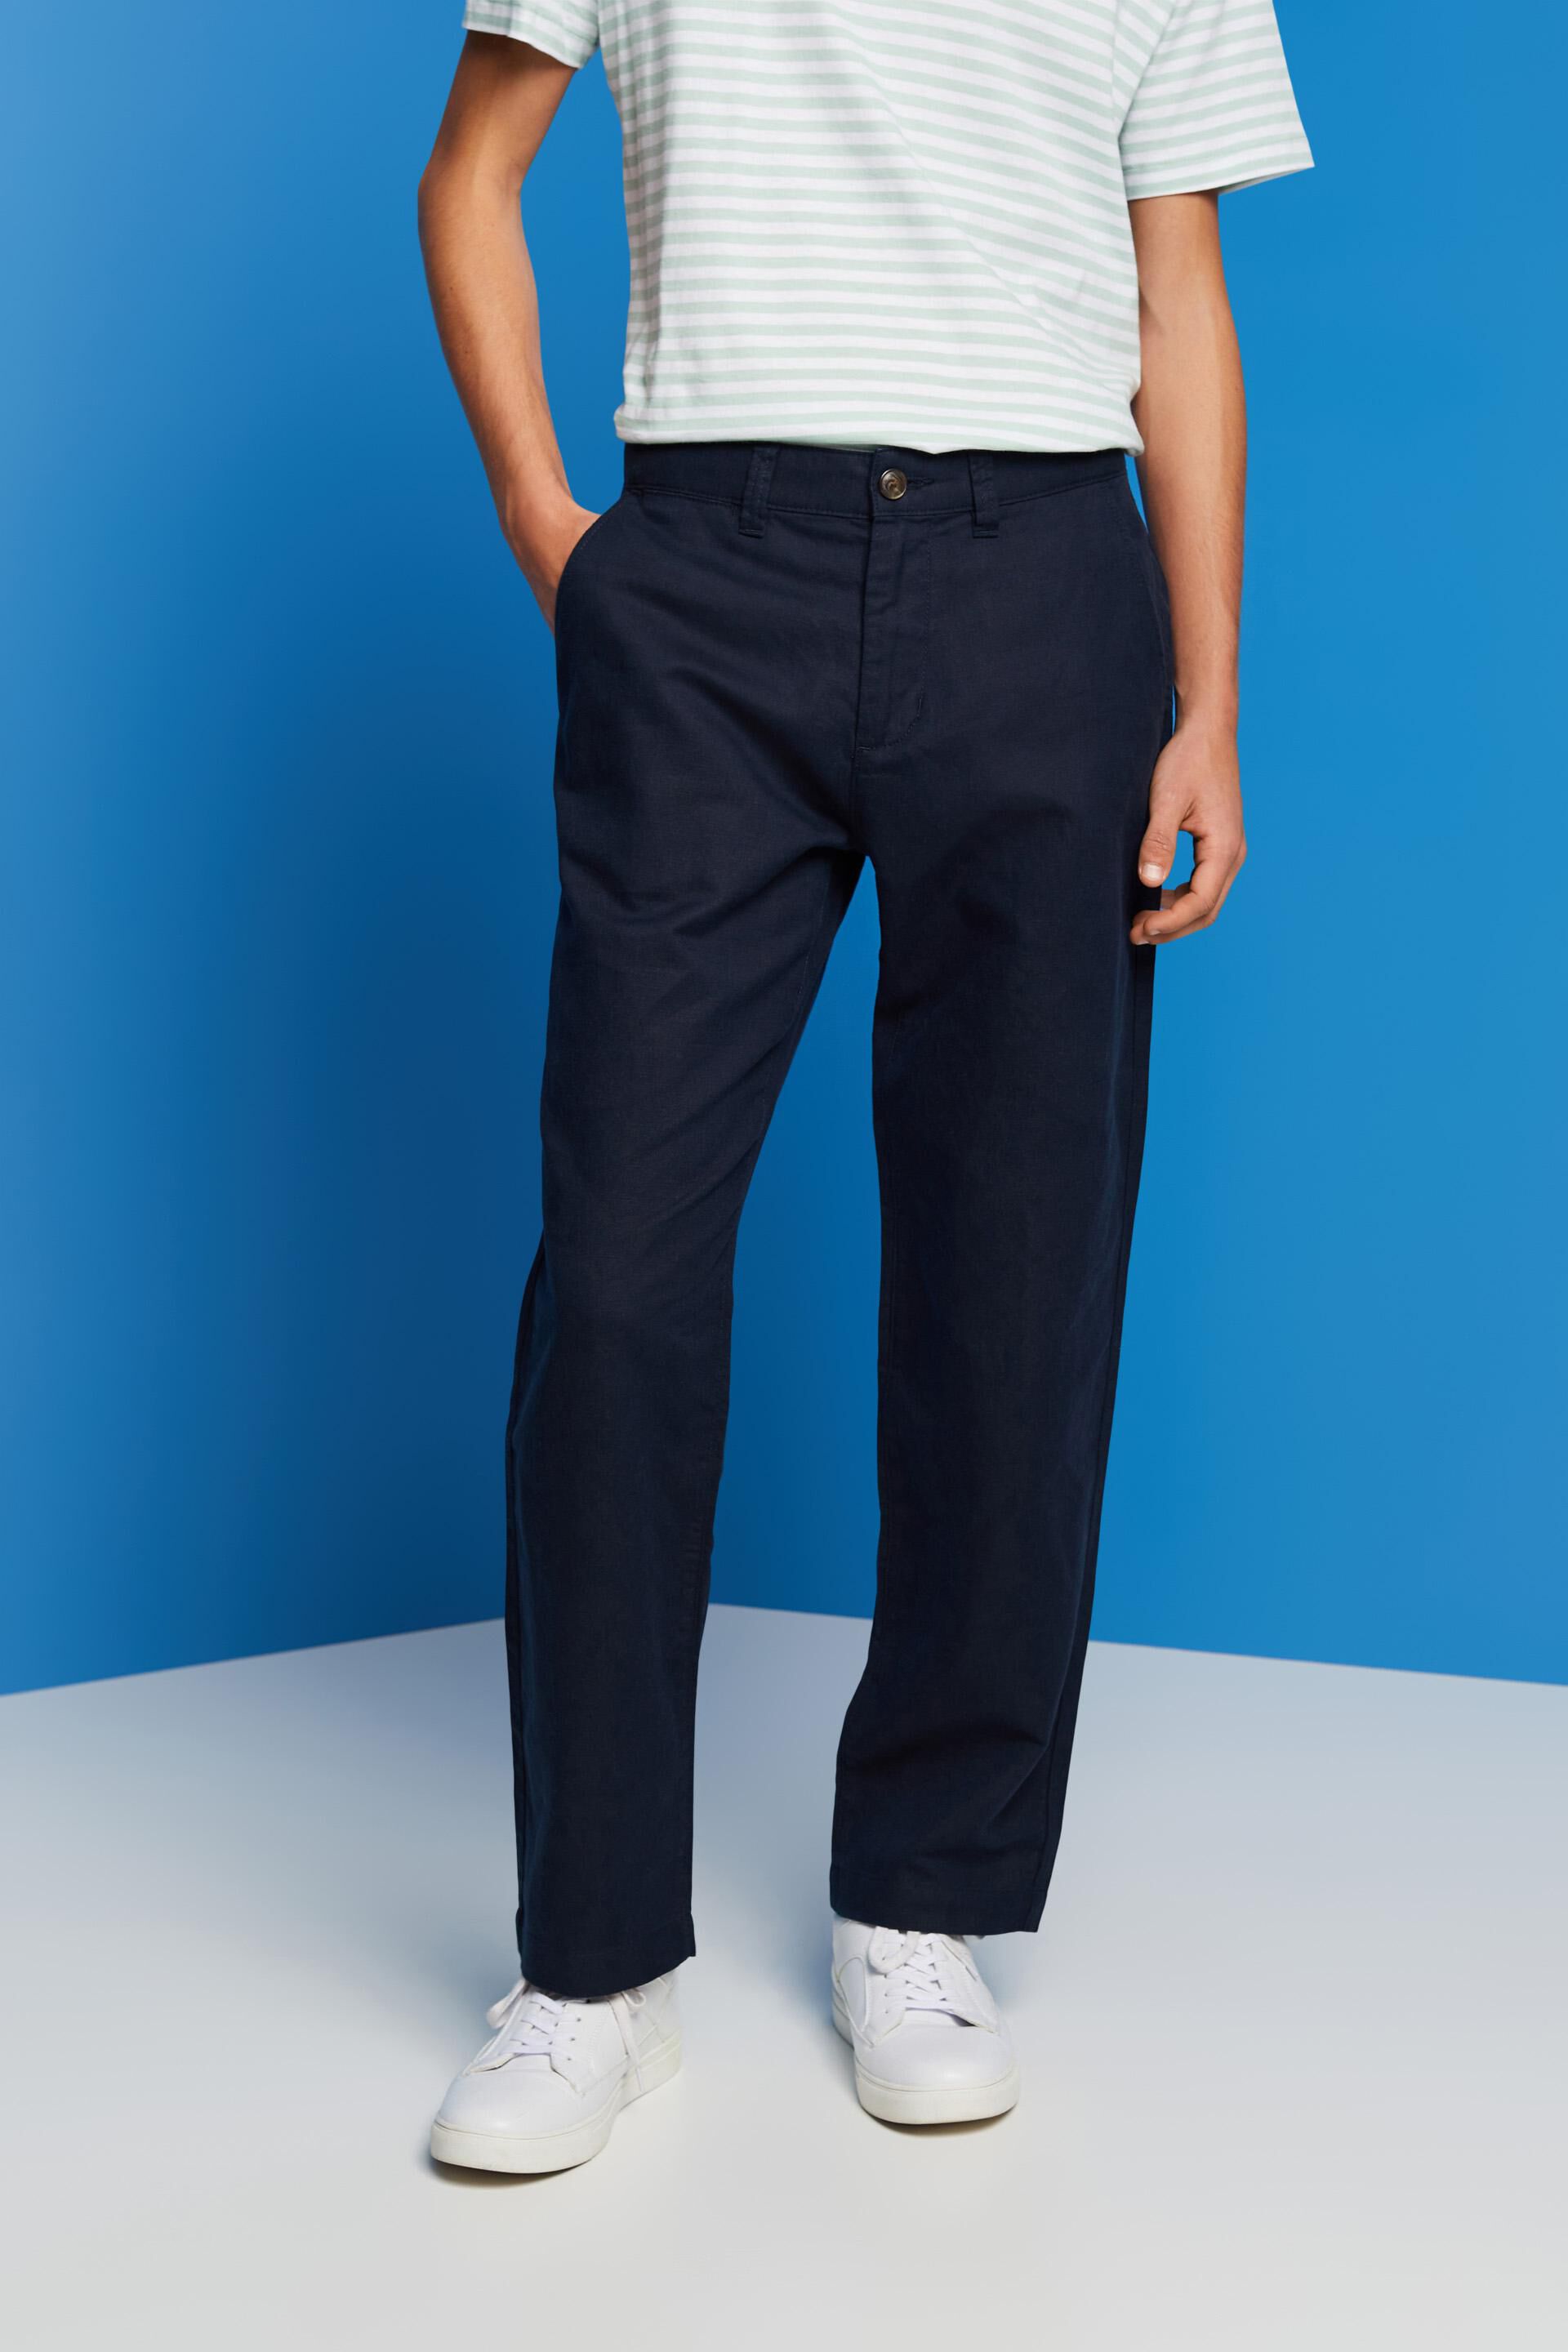 ESPRIT  Cotton and linen blended trousers at our Online Shop